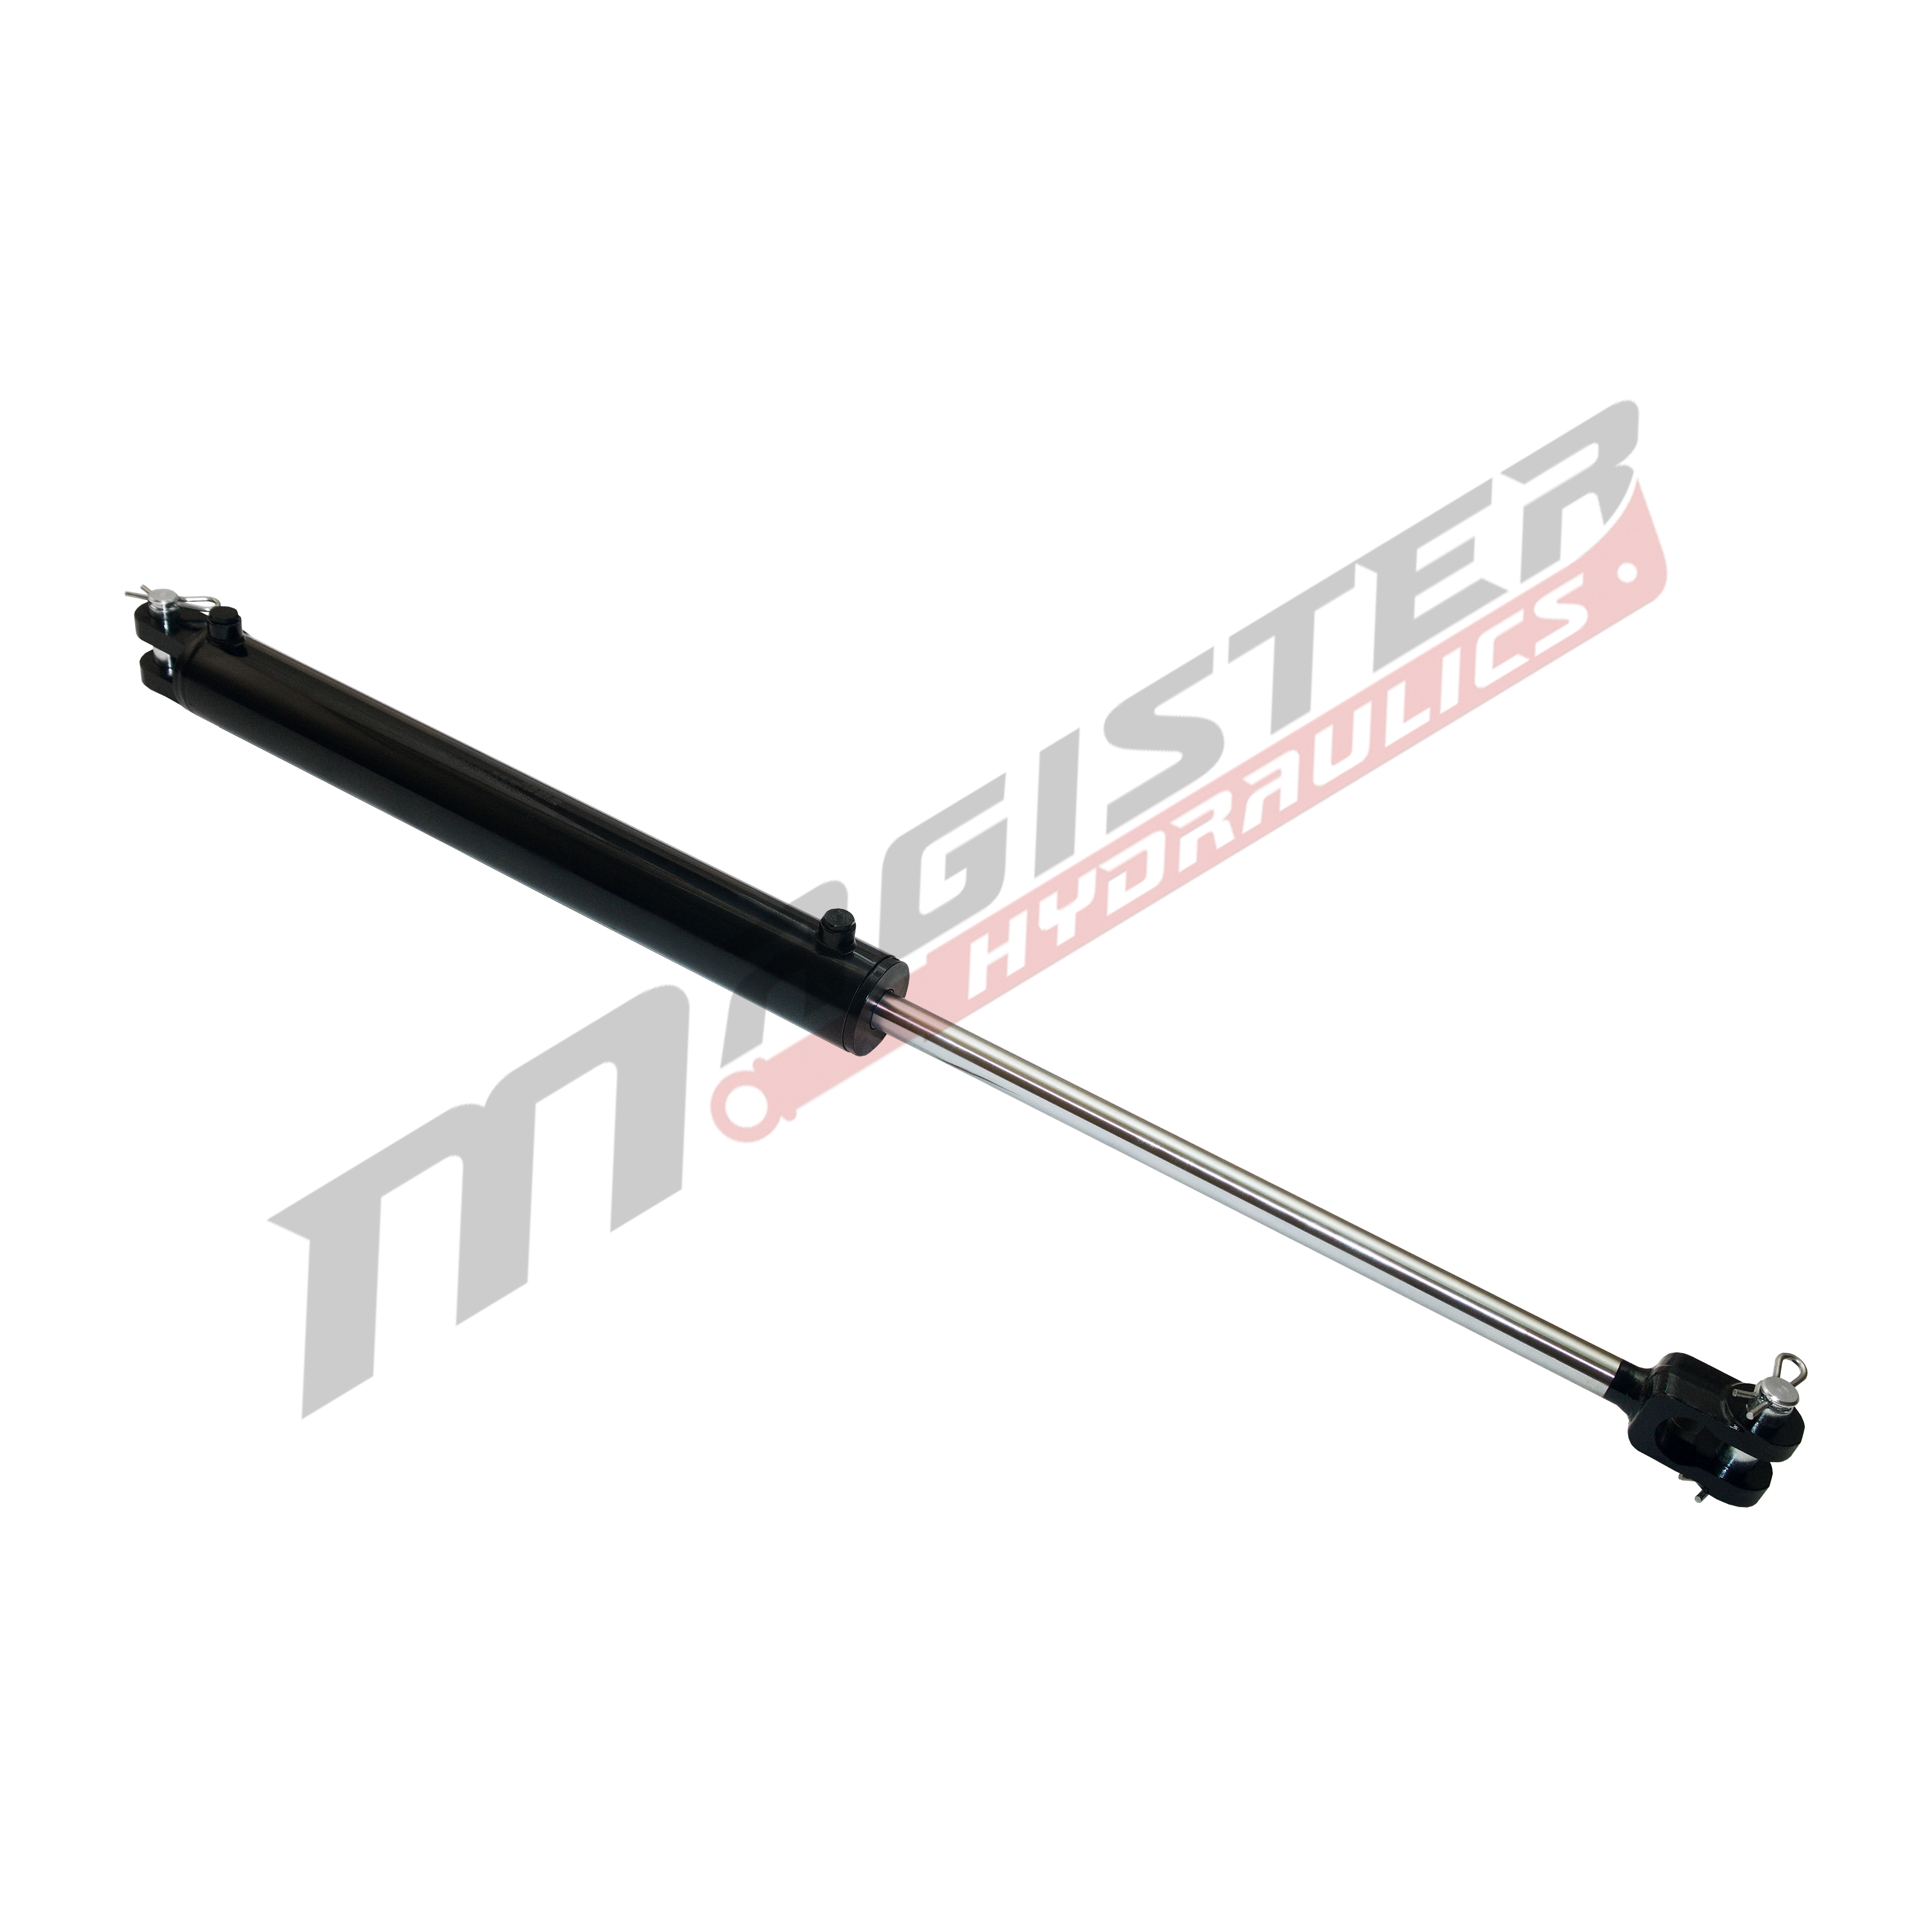 3.5 bore x 14 stroke hydraulic cylinder, ag clevis double acting cylinder | Magister Hydraulics